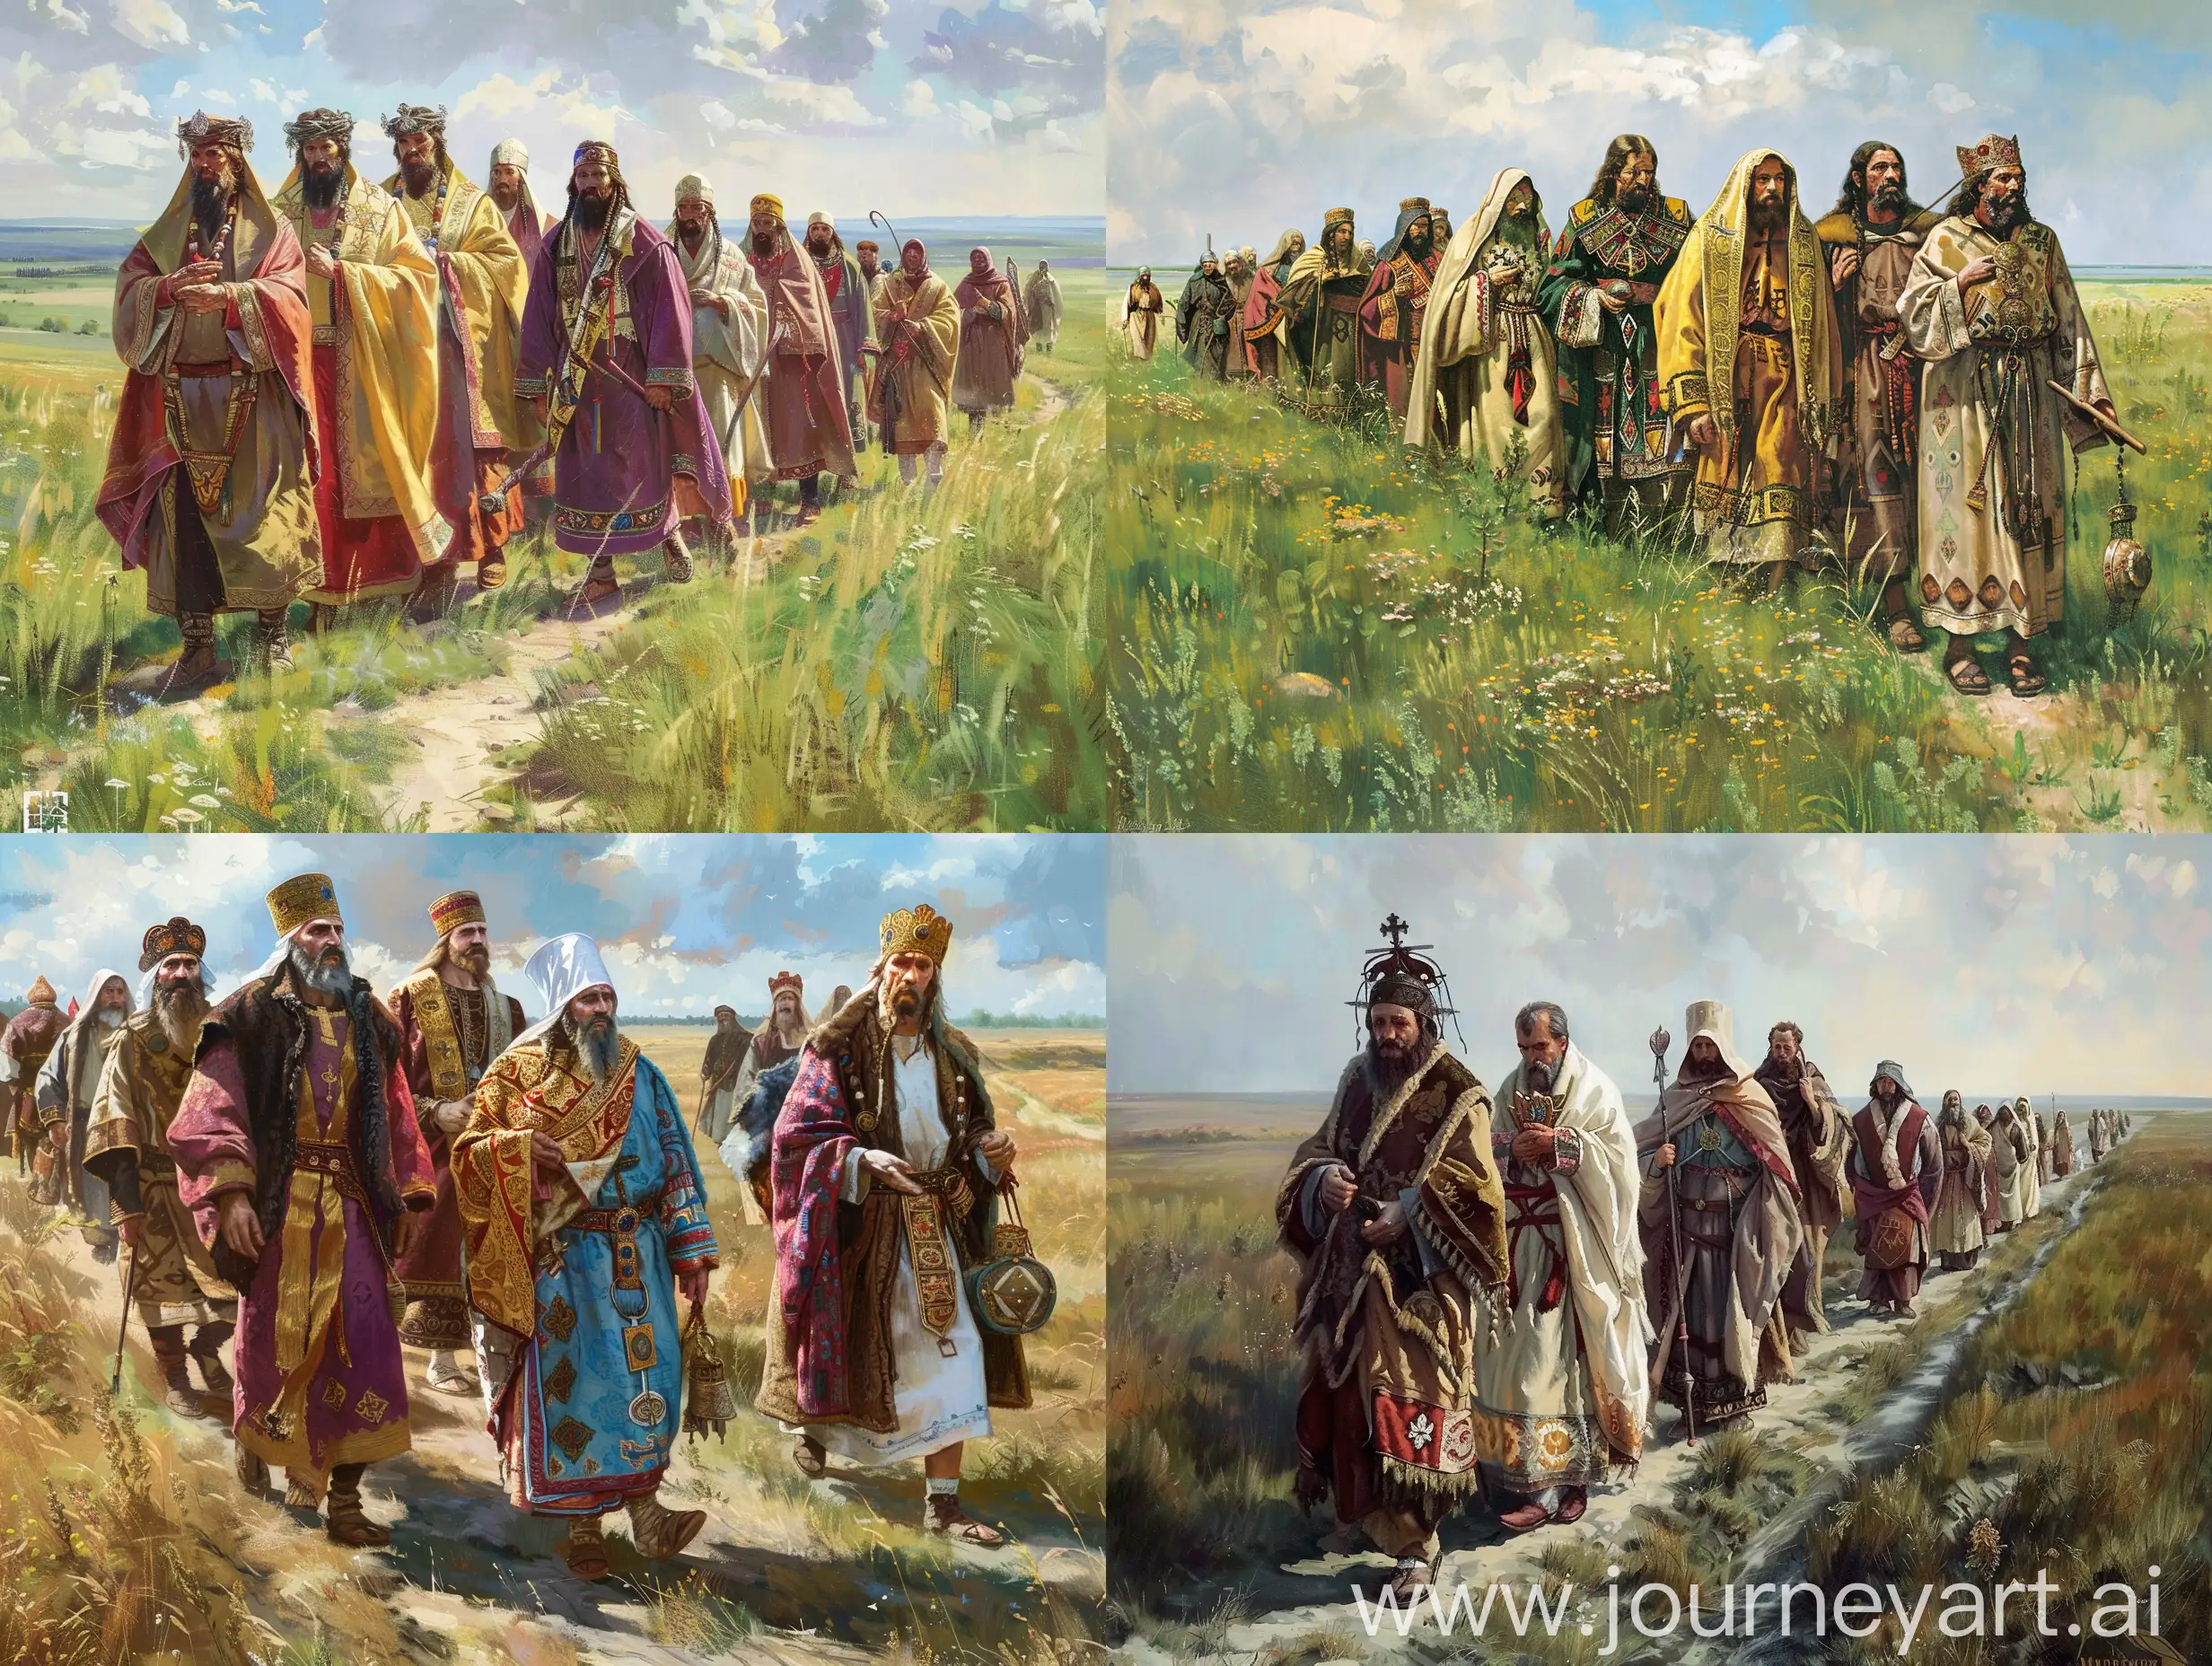 Disciples Spreading Teachings in Russian Steppes: "Disciples of Christ traversing the vast Russian steppes, sharing his teachings with nomadic Slavic tribes while adorned in traditional robes and symbols." based in Anatoly Timofeevich Fomenko e Gleb Vladimirovich Nosovsk books